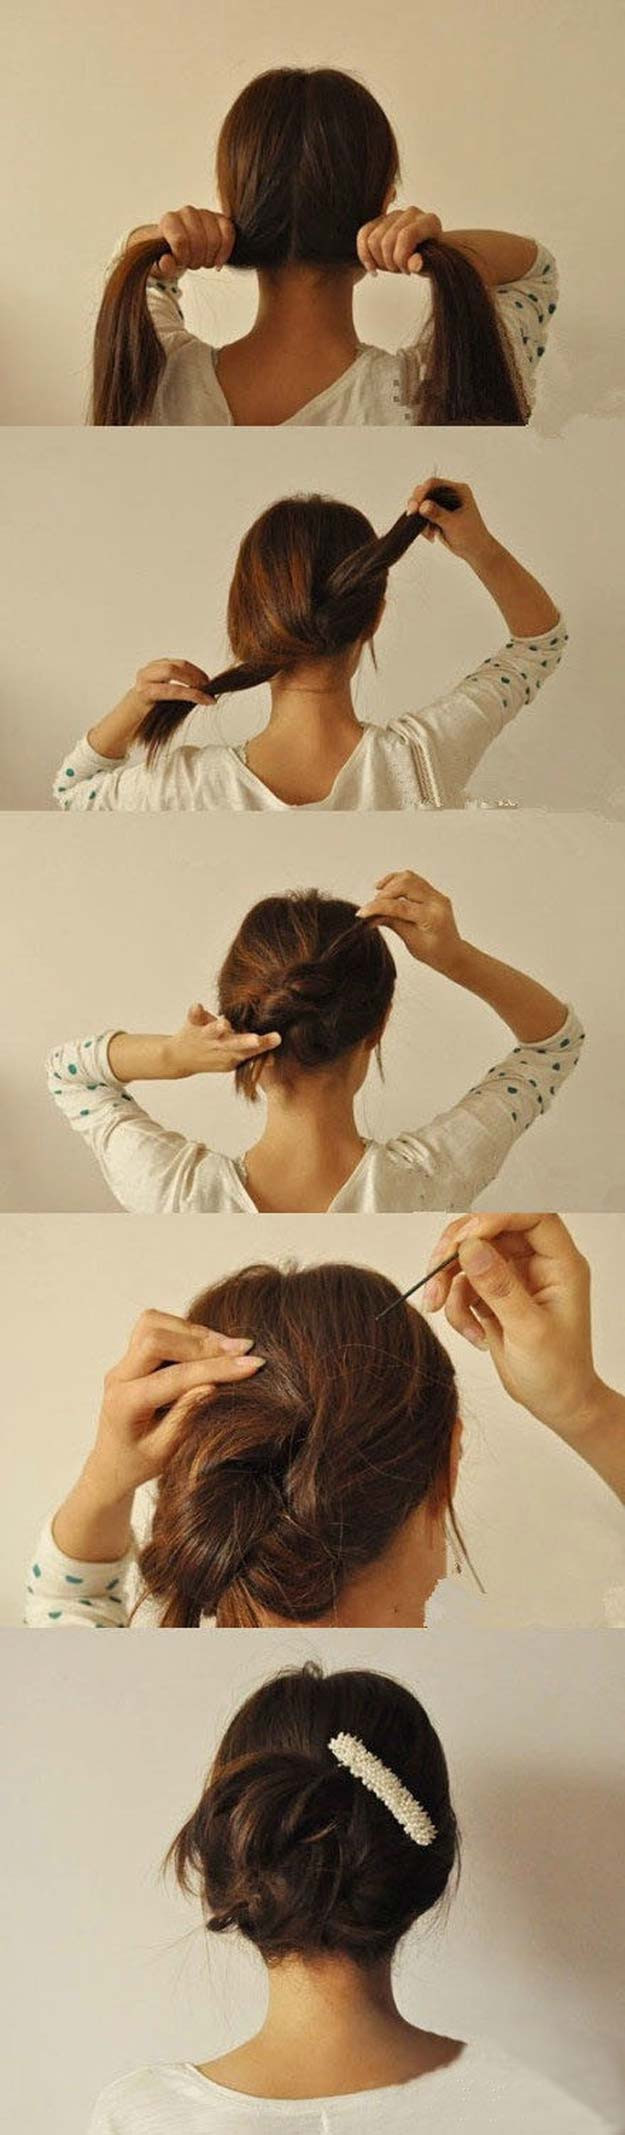 DIY Womens Haircuts
 36 Best Hairstyles for Long Hair DIY Projects for Teens